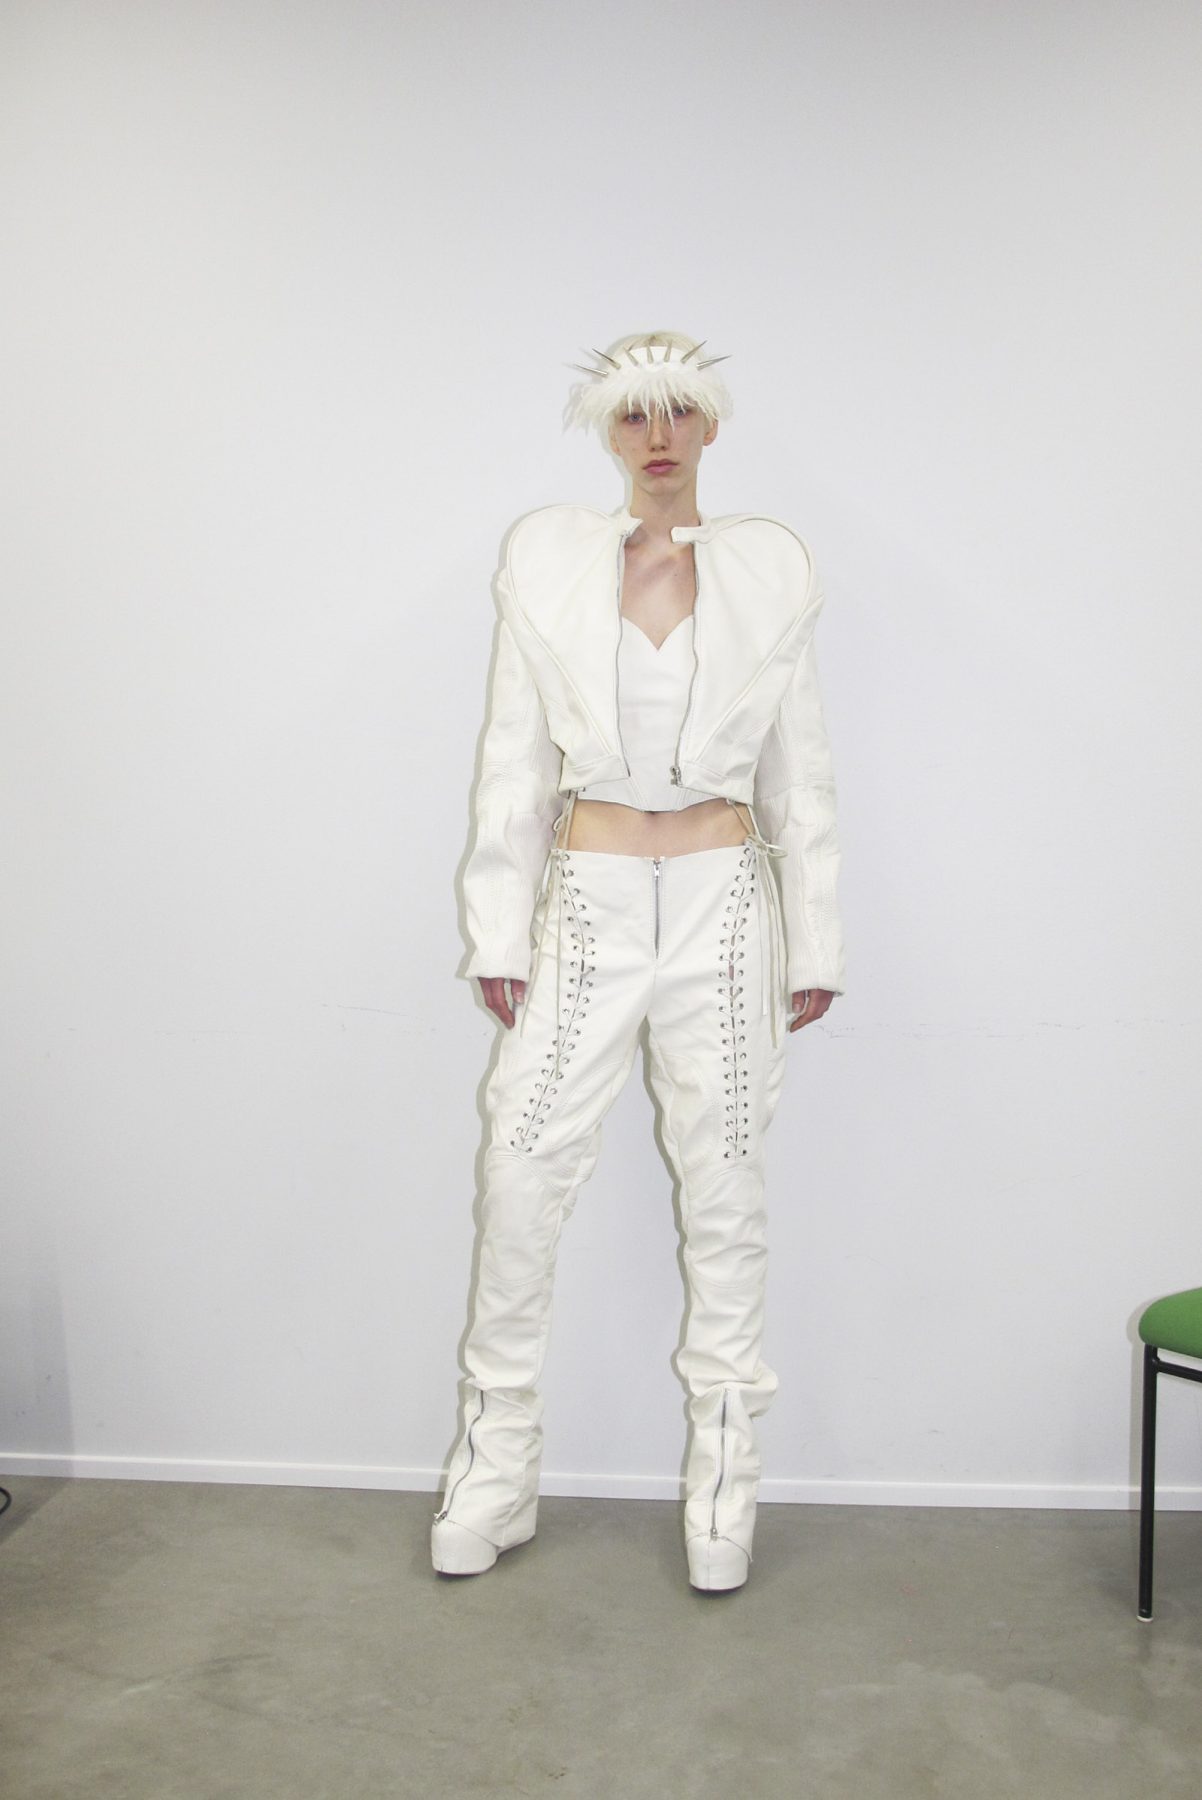 Photo of model wearing white puffy and spiked hairband, white puffy-sleeved leather jacket and leather pants with braided details